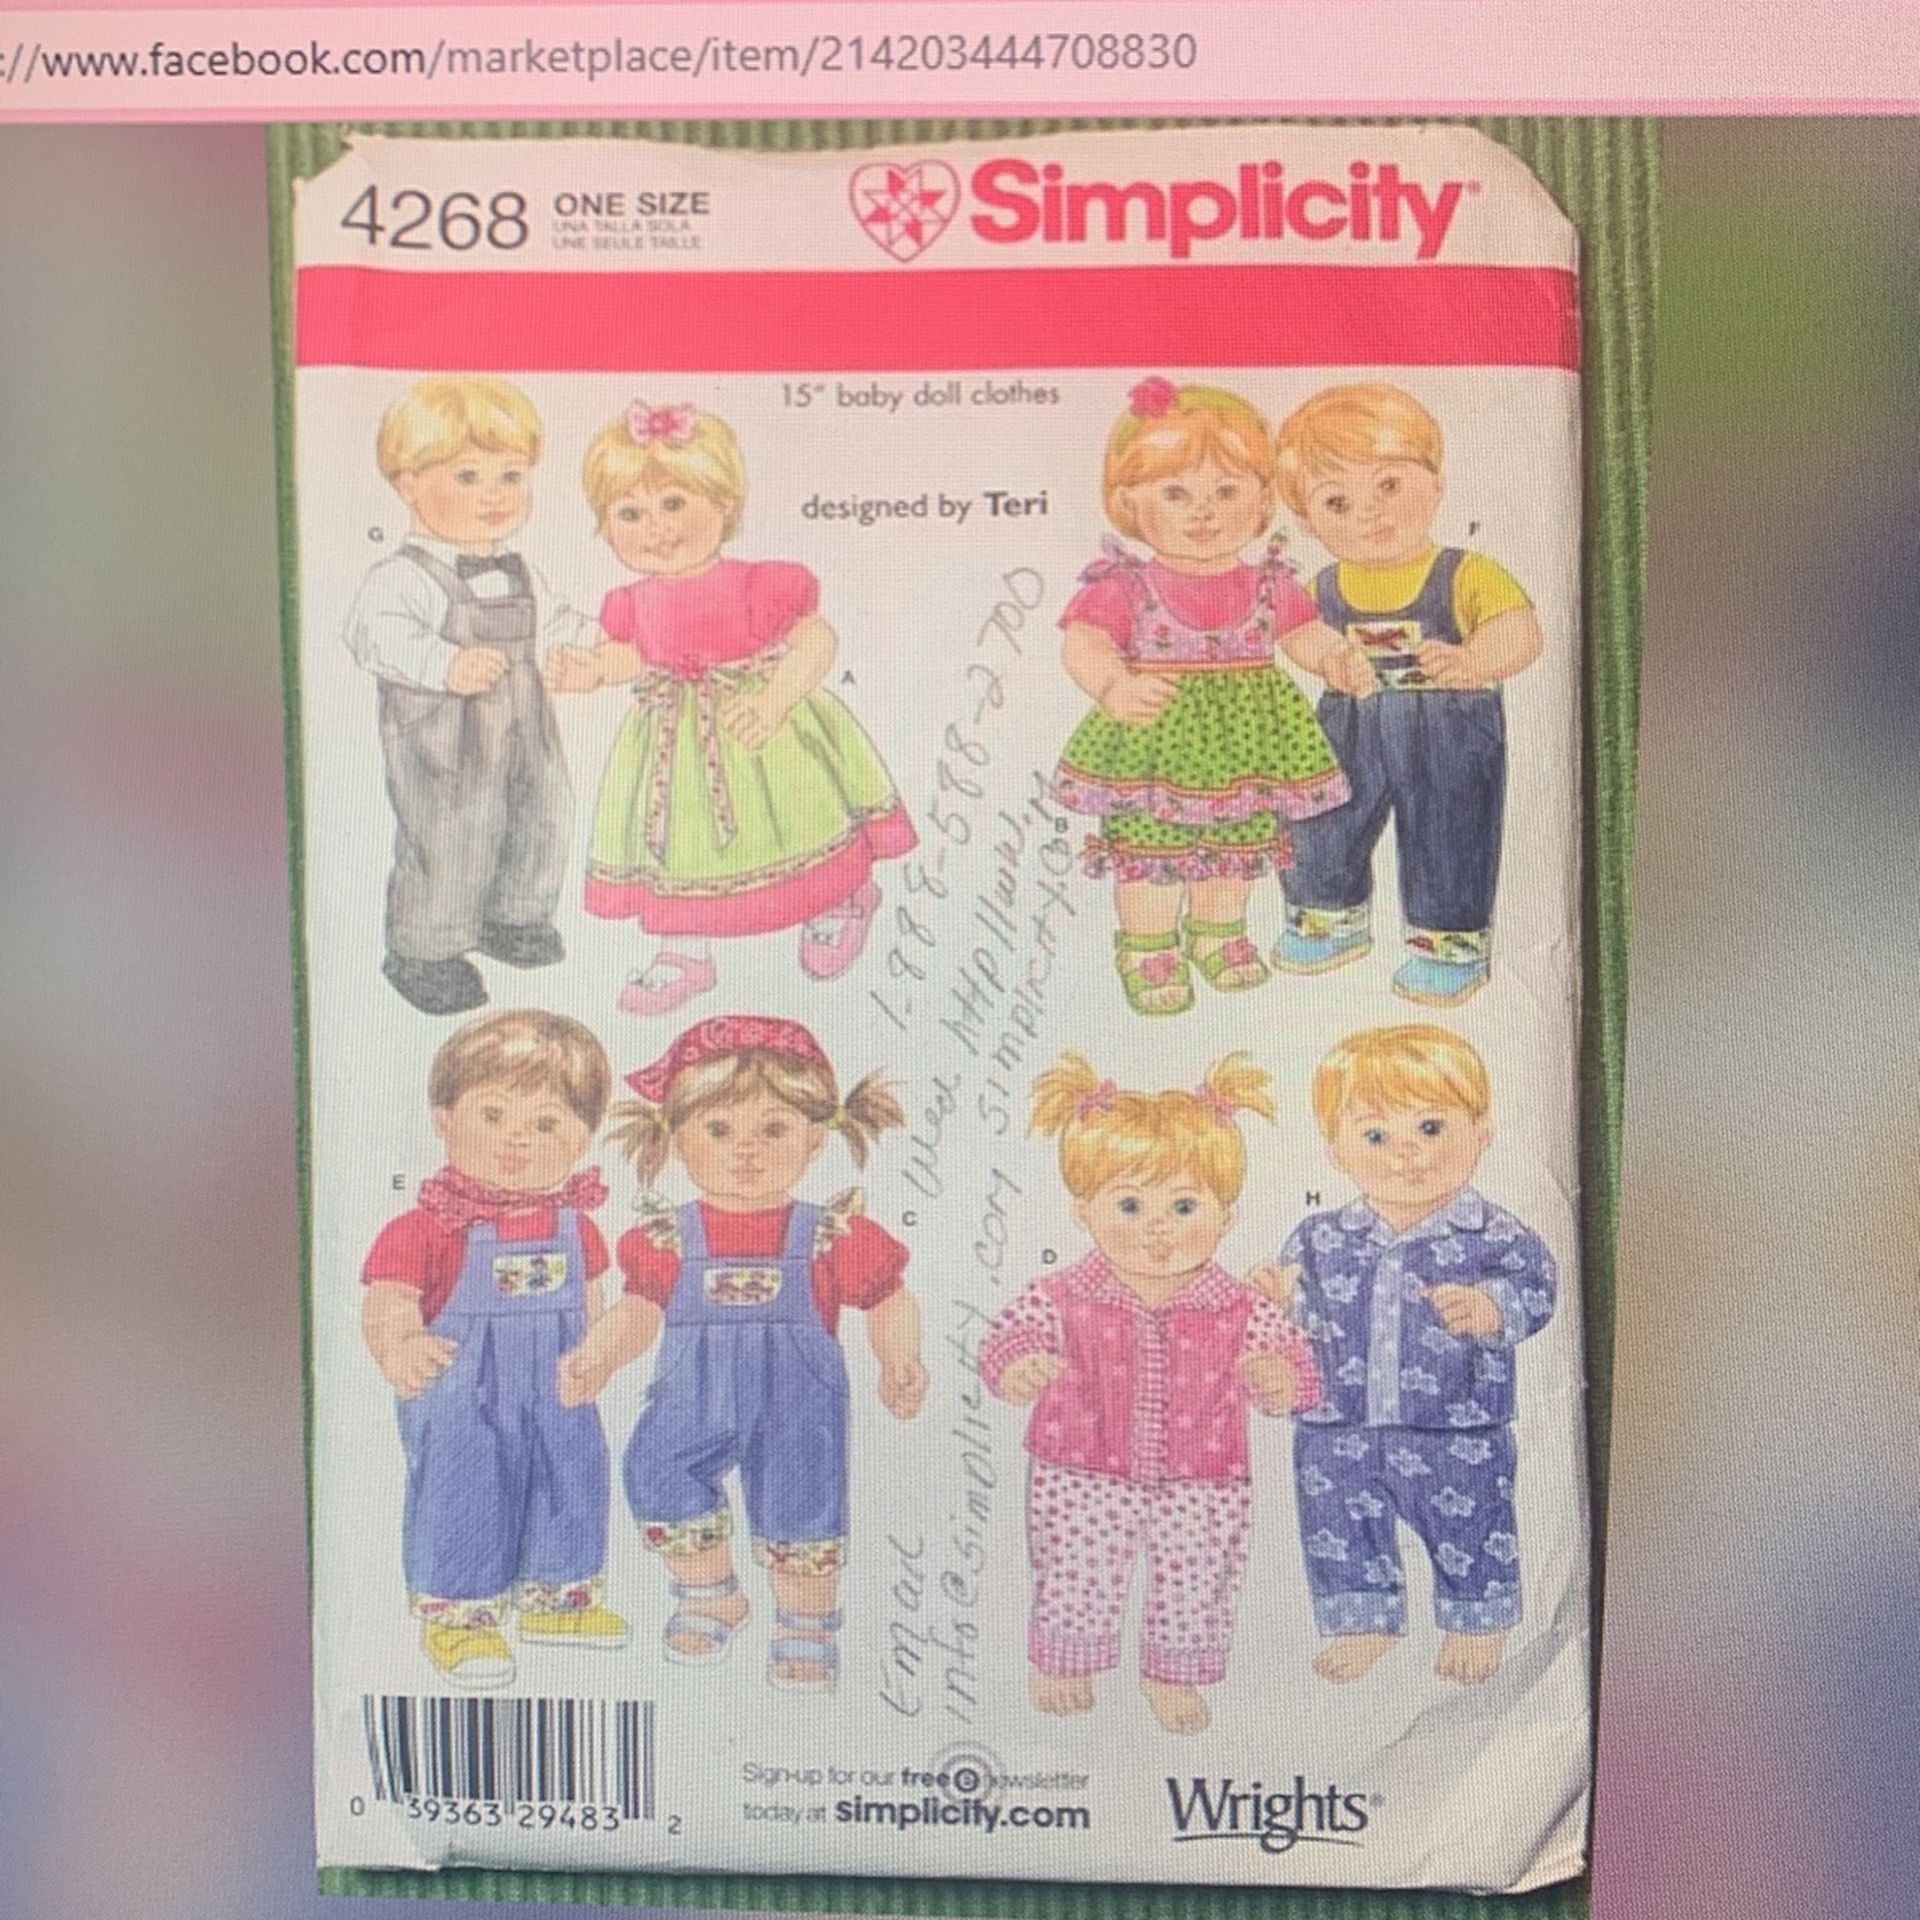 Simplicity Doll Clothes 15” Pattern 4268